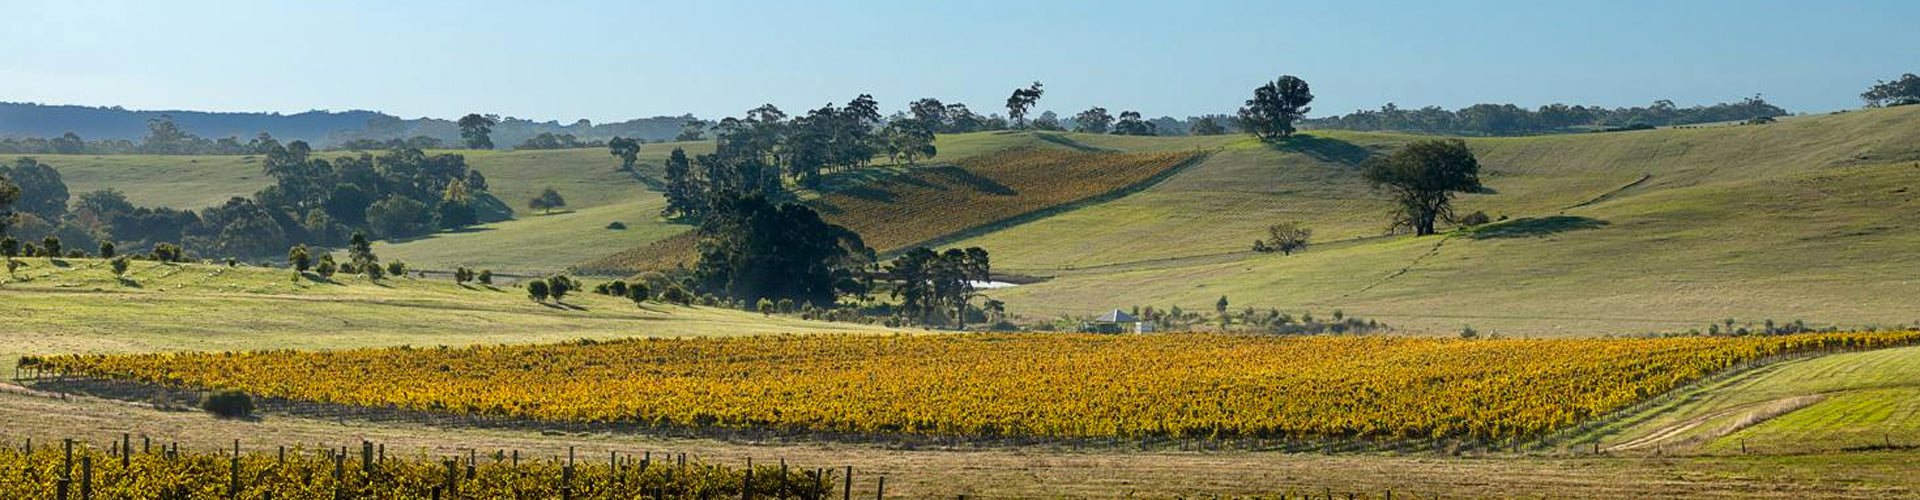 Grosset Vineyards in the Clare Valley, South Australia